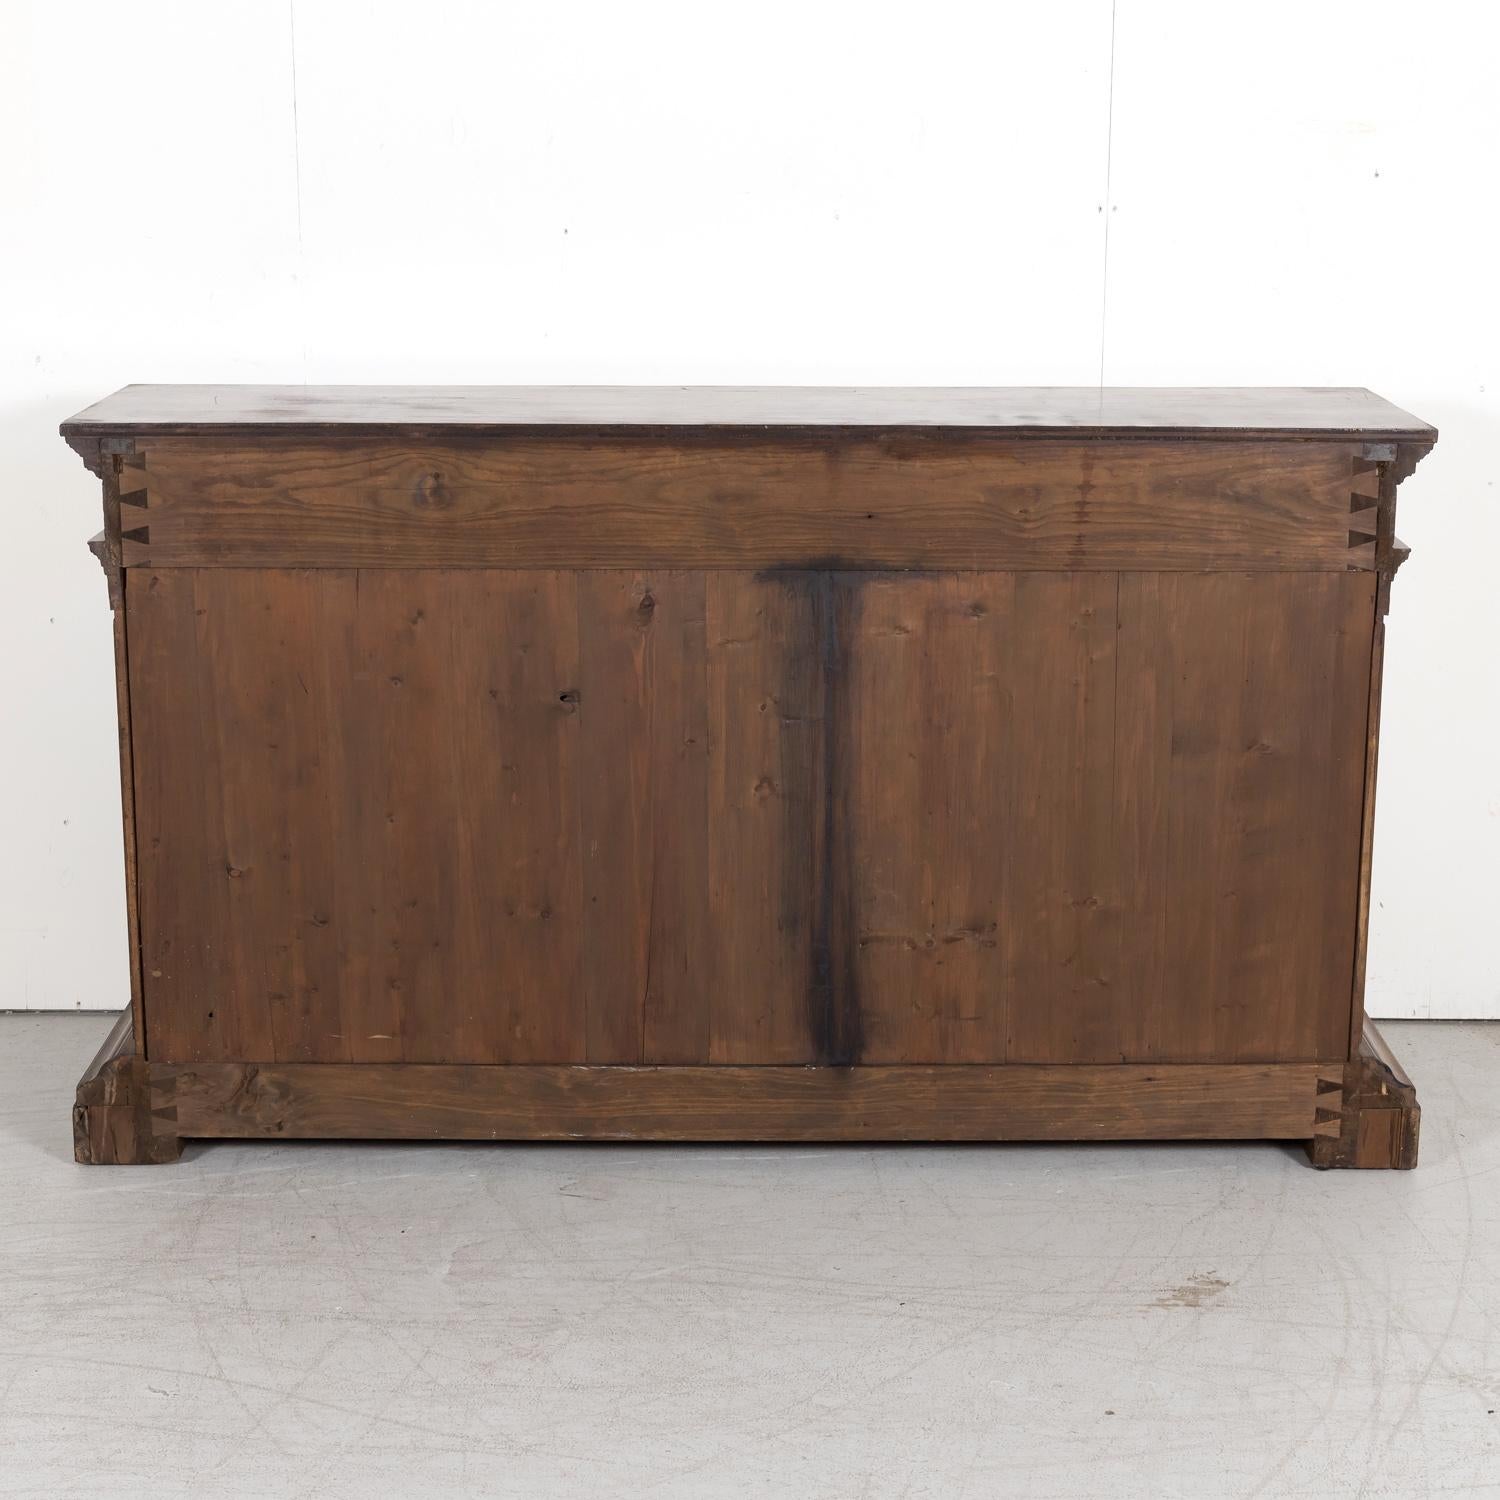 19th Century, Spanish Renaissance Style Carved Walnut Wall Console with Drawers For Sale 14